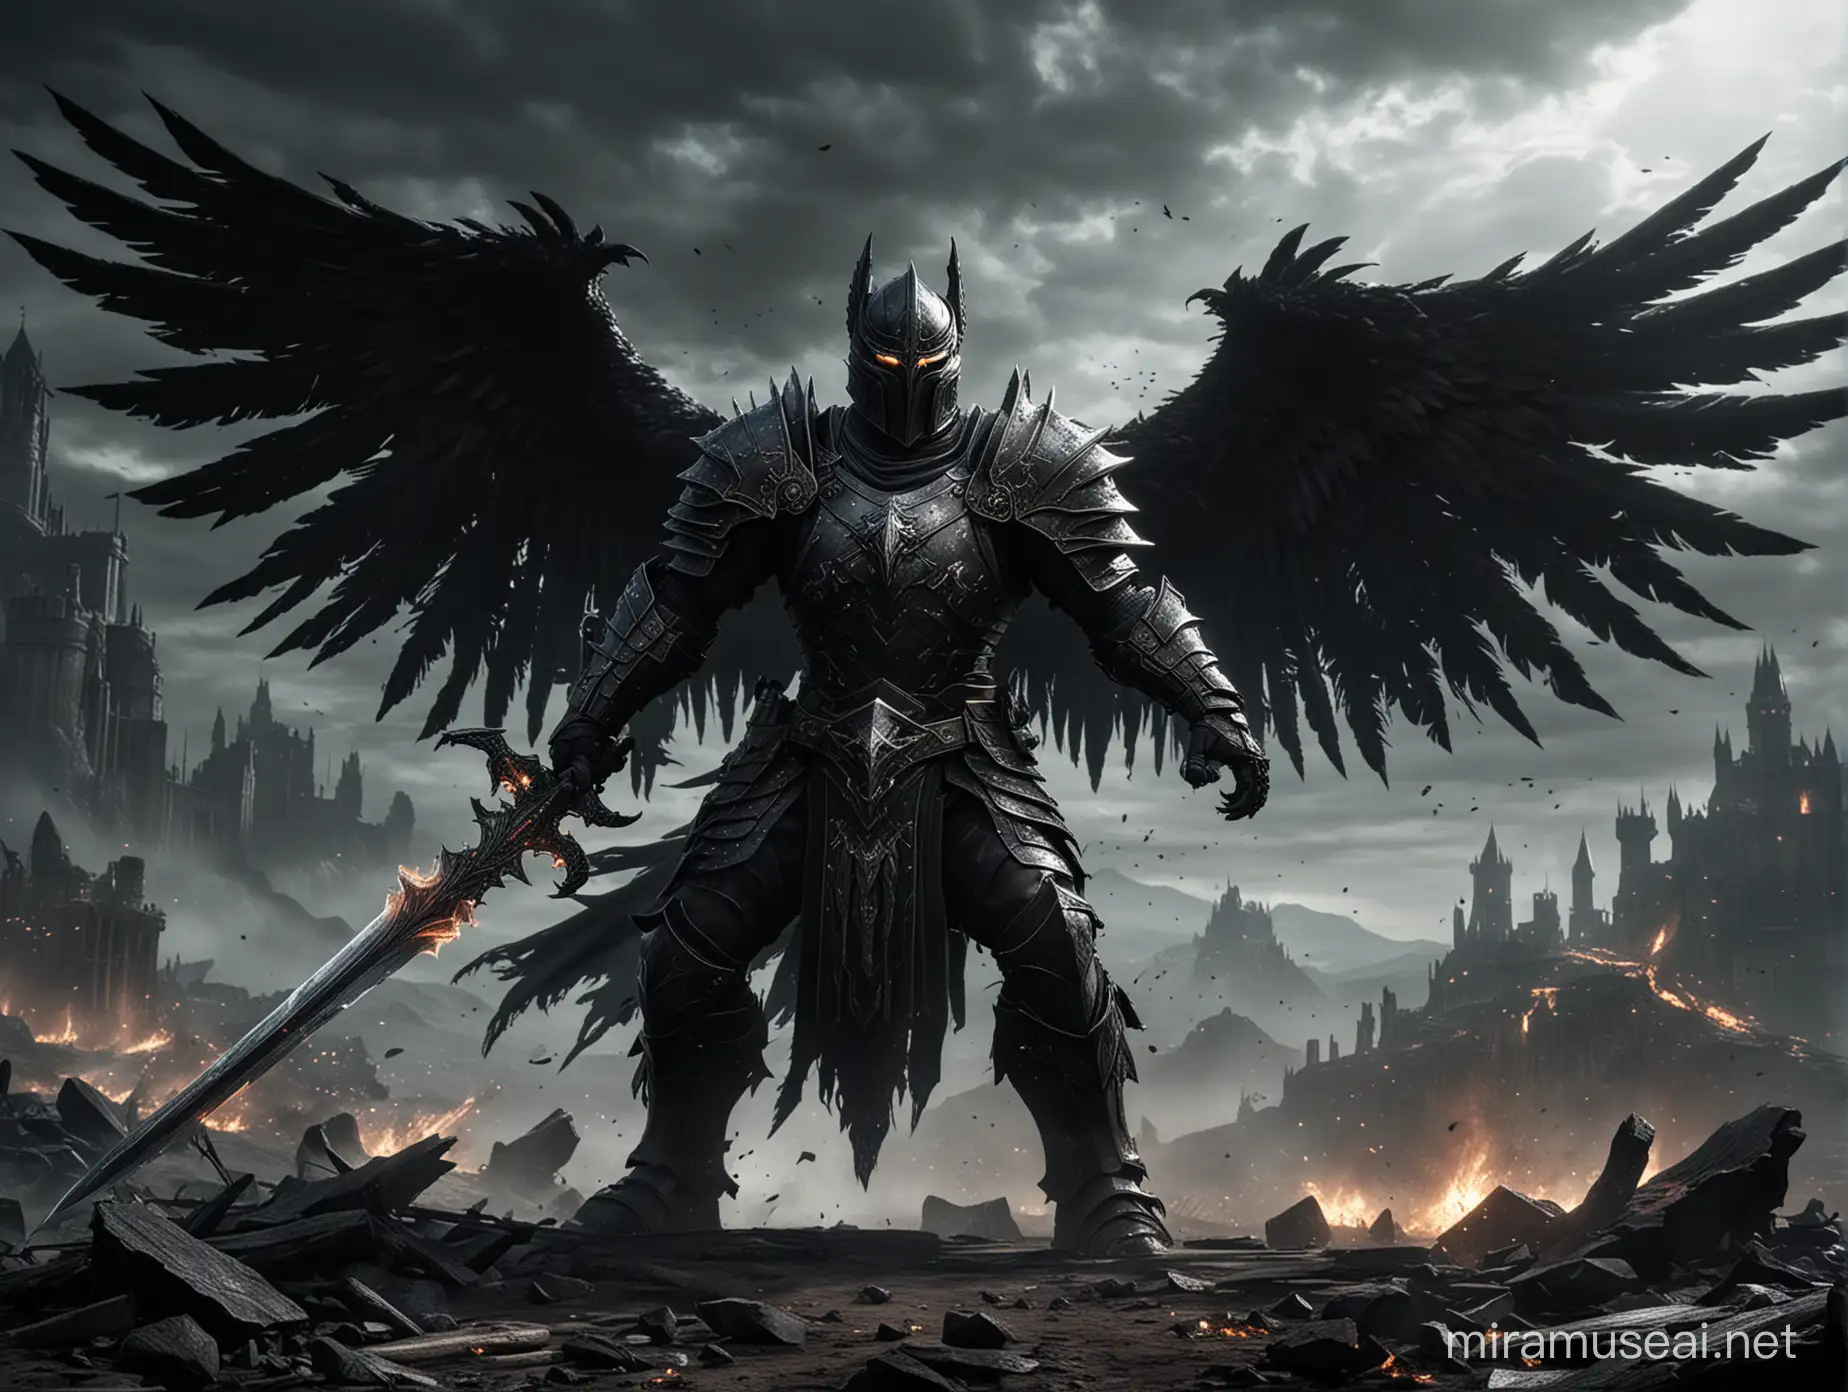 (Your prompt goes here) 

Generate an image of an Elder Scrolls-inspired final boss battle against a Colossal Black Knight, wielding a black eagle-inspired sword and armor adorned with black eagle wings. The dark, ominous setting should evoke a sense of dread and intensity. The battlefield is littered with debris and broken remnants of previous foes. The Knight exudes an aura of immense power and malice, its dark armor radiating sinister energy. The knight's eyes glow fiercely with an unearthly light, and its roar echoes through the desolate land. --ar 2:3